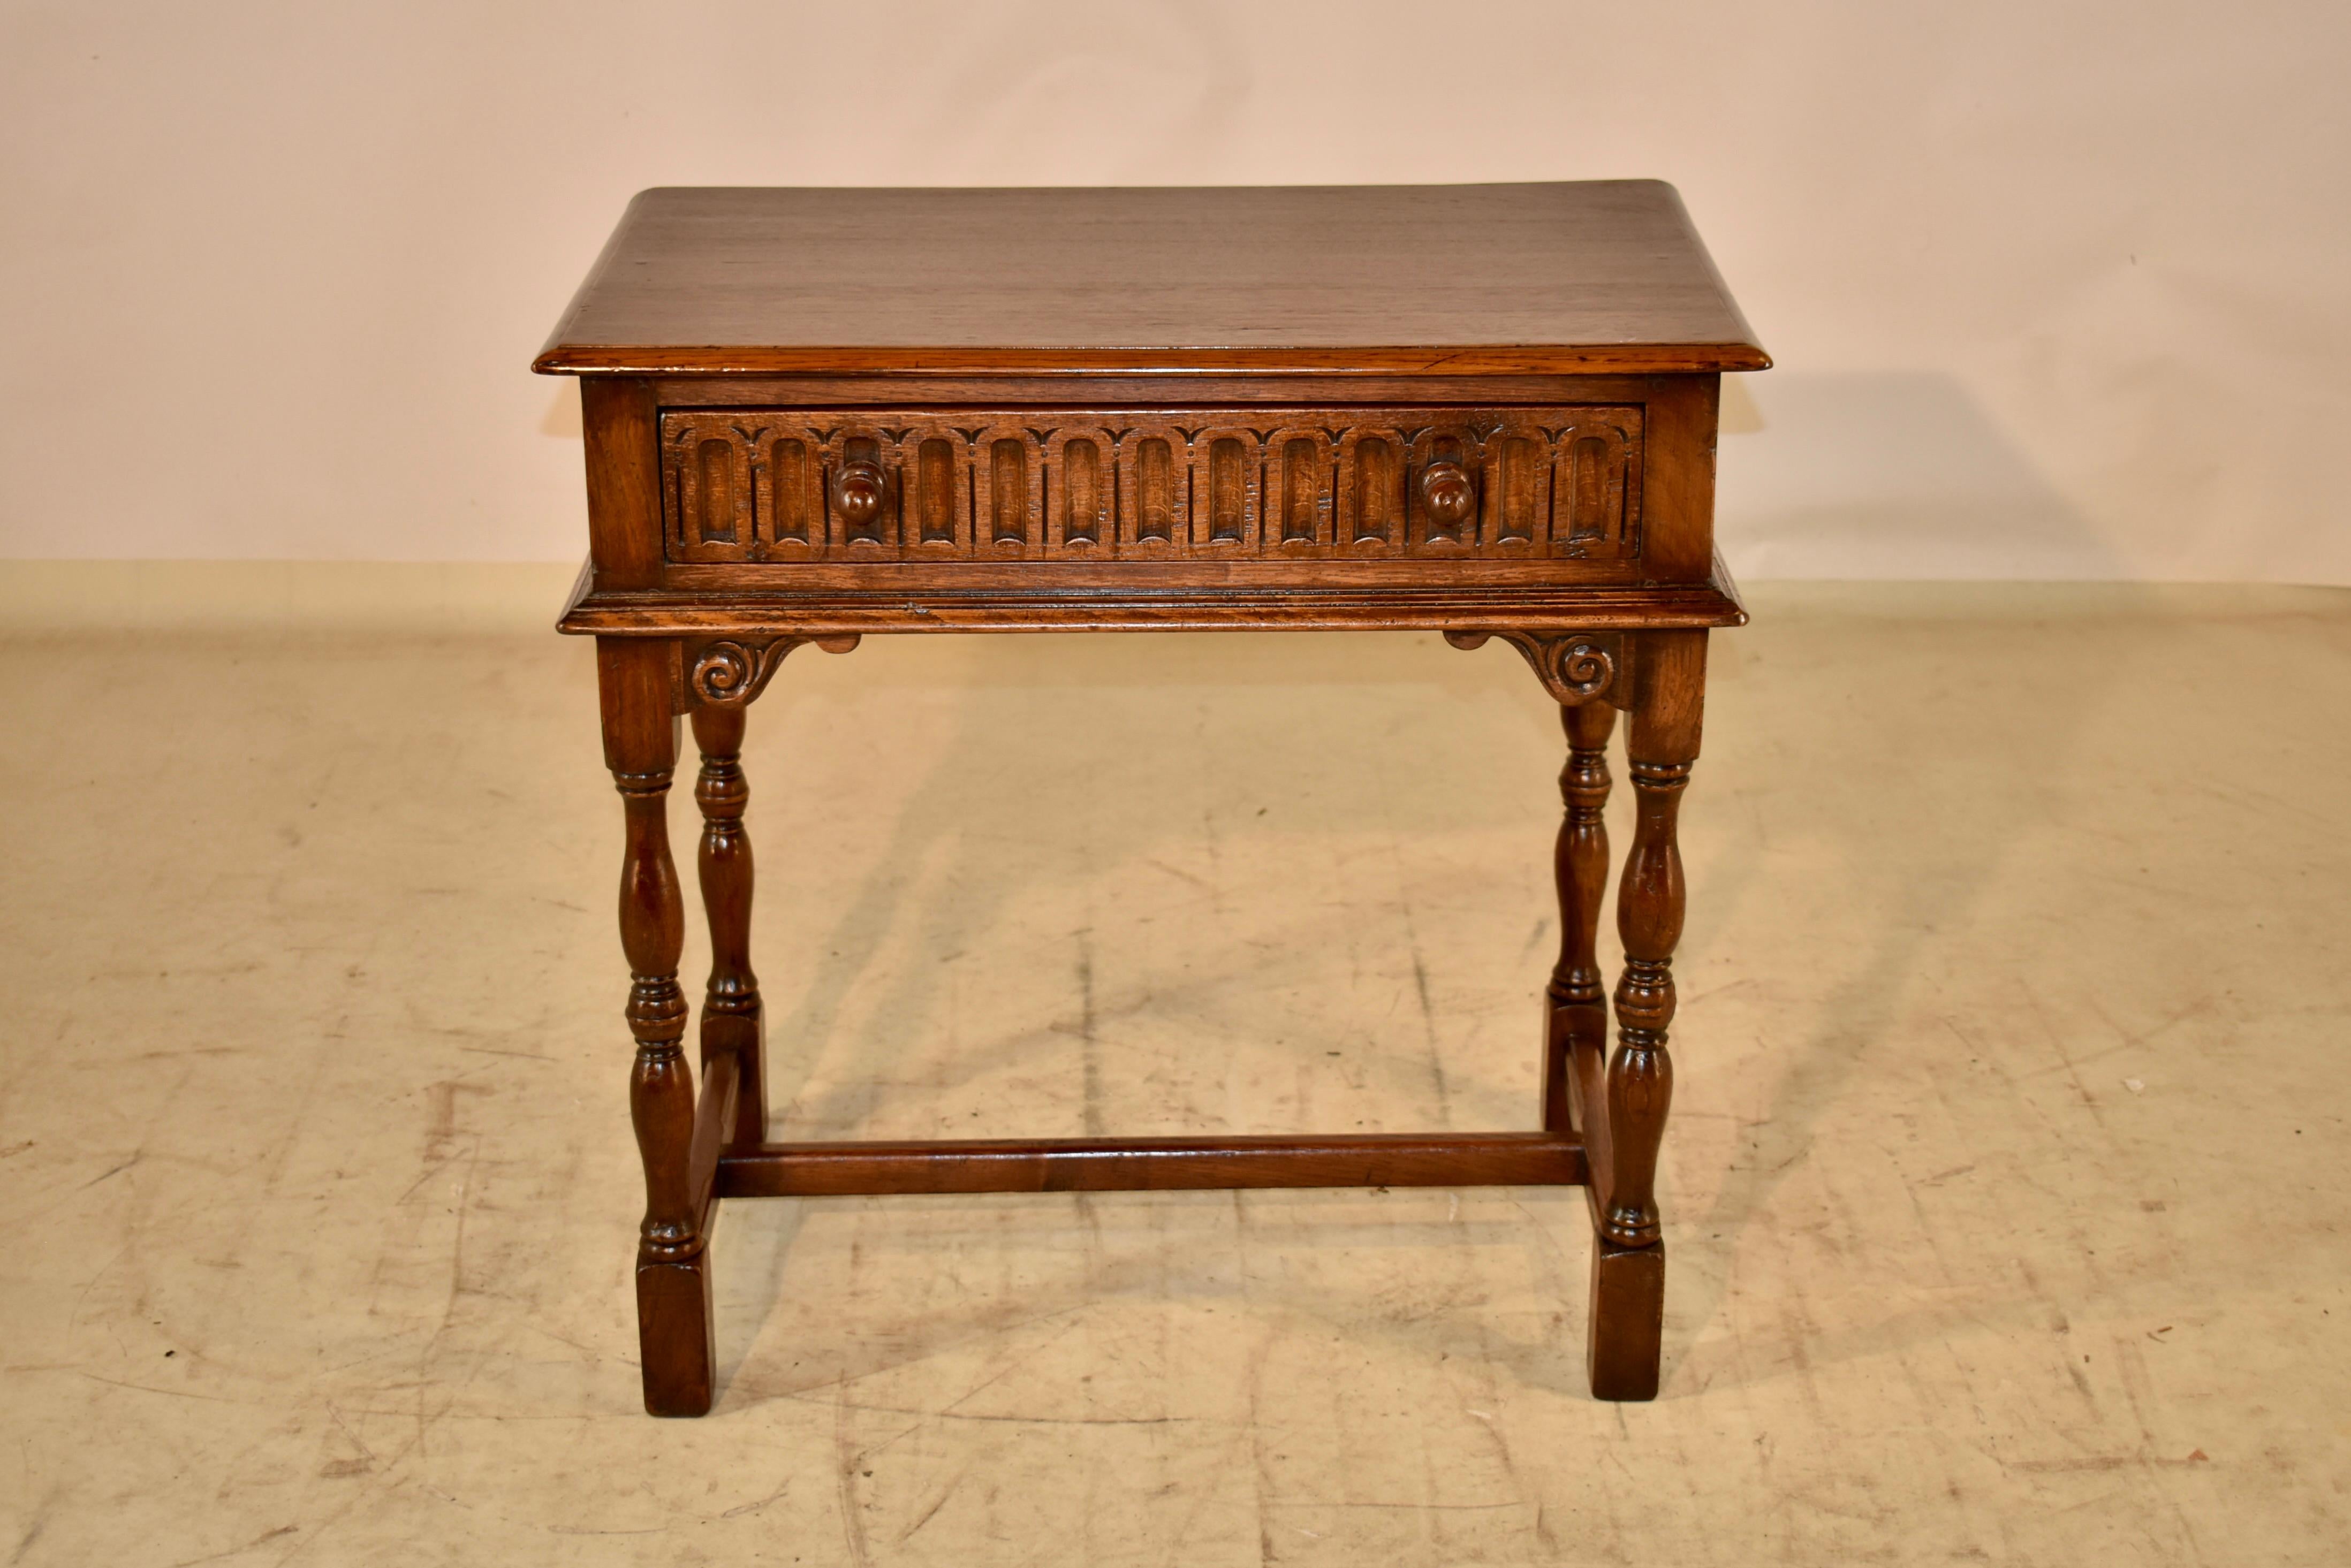 circa 1900 Period Edwardian oak side table from England. The top has a beveled edge, and follows down to a hand carved decorated apron. In the front of the table, the apron contains a single drawer. The table is supported on hand turned legs, joined